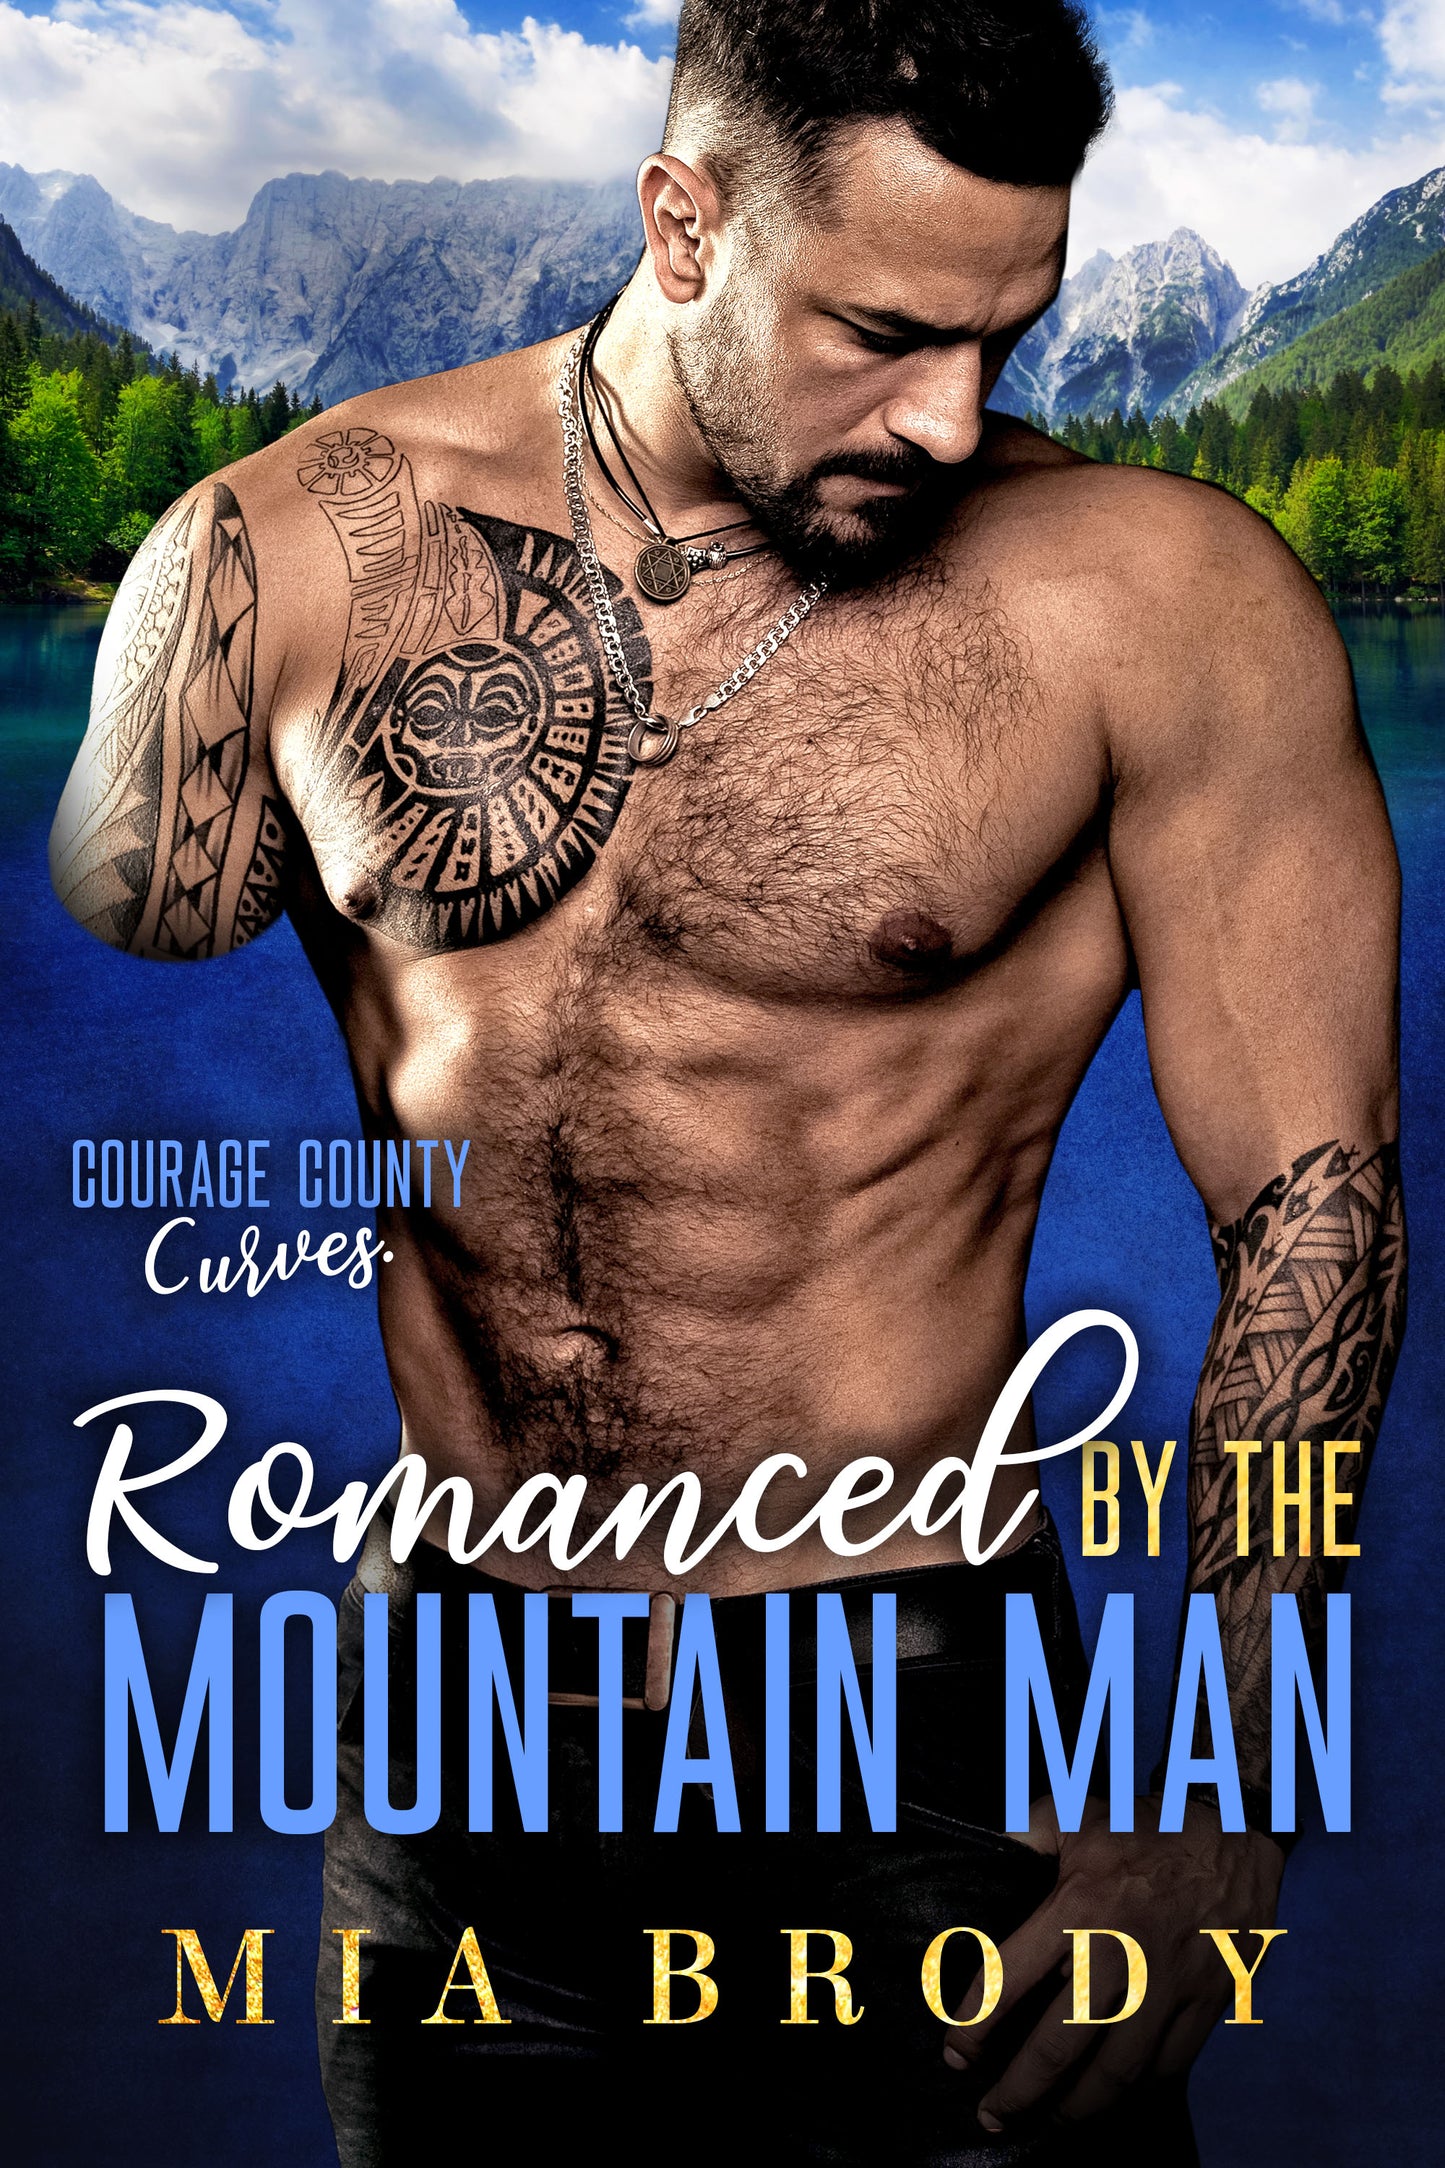 Romanced by the Mountain Man